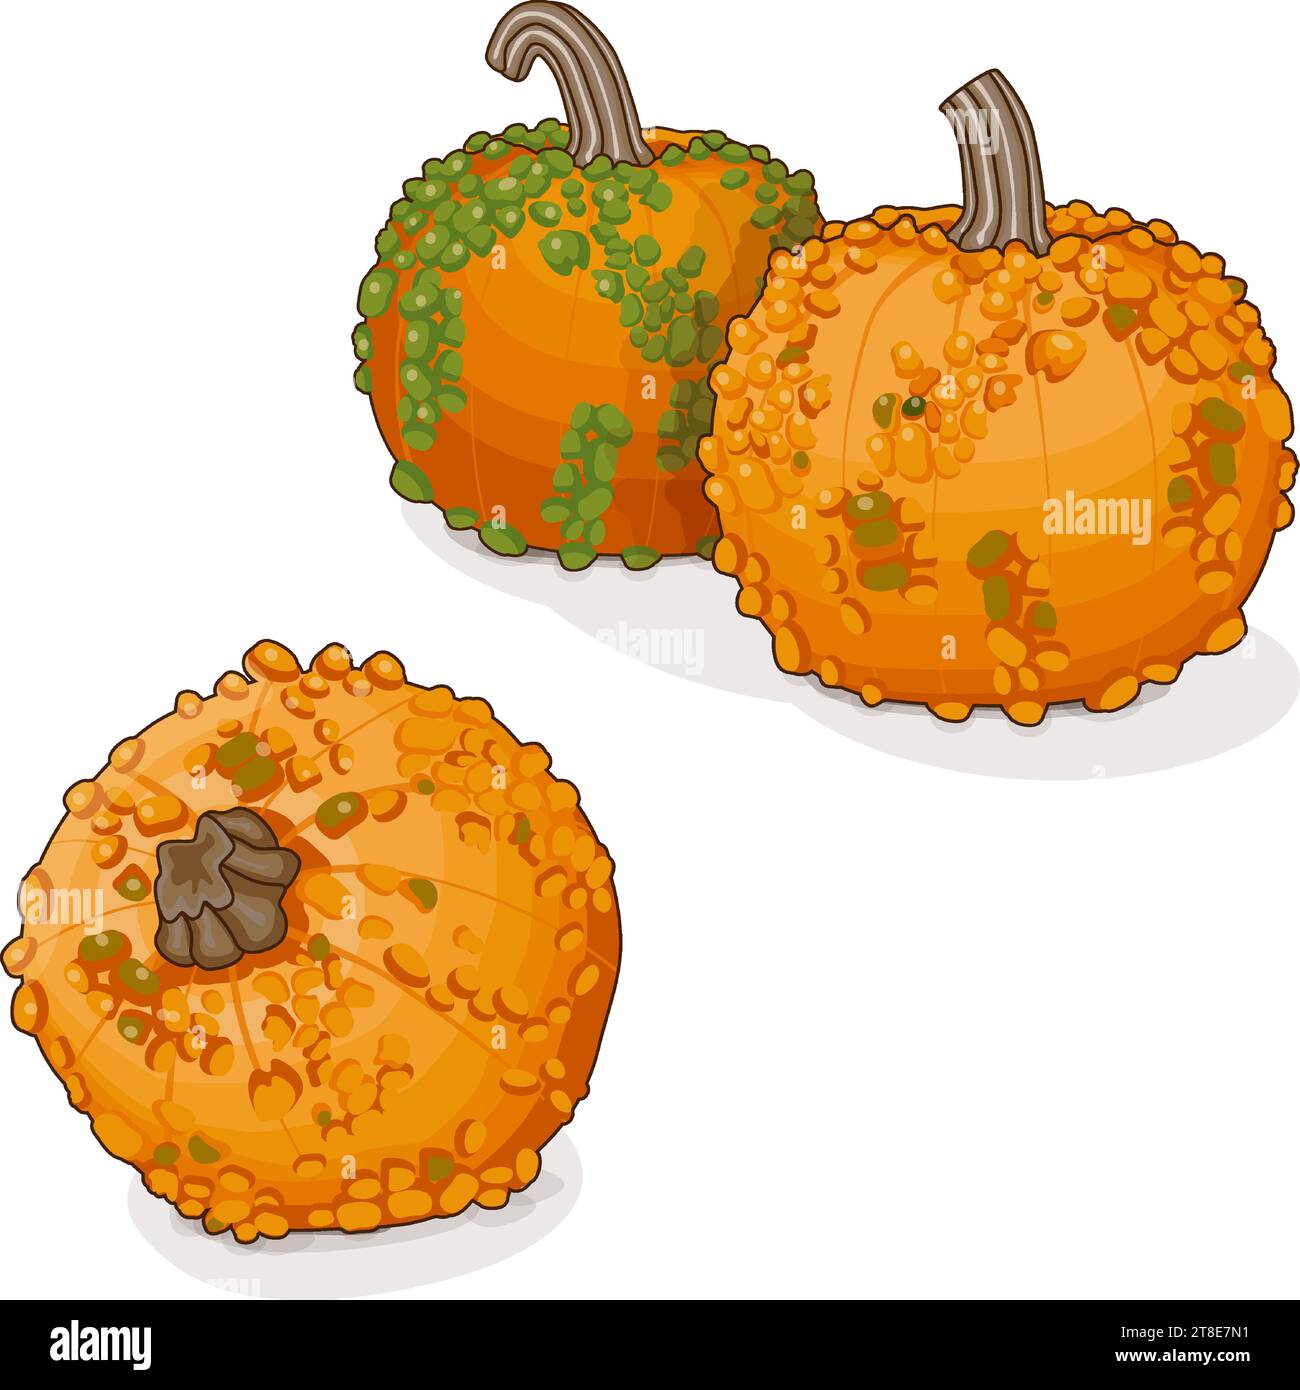 Group of Knucklehead Pumpkins. Winter squash. Cucurbita pepo. Fruits and vegetables. Clipart. Isolated vector illustration. Stock Vector